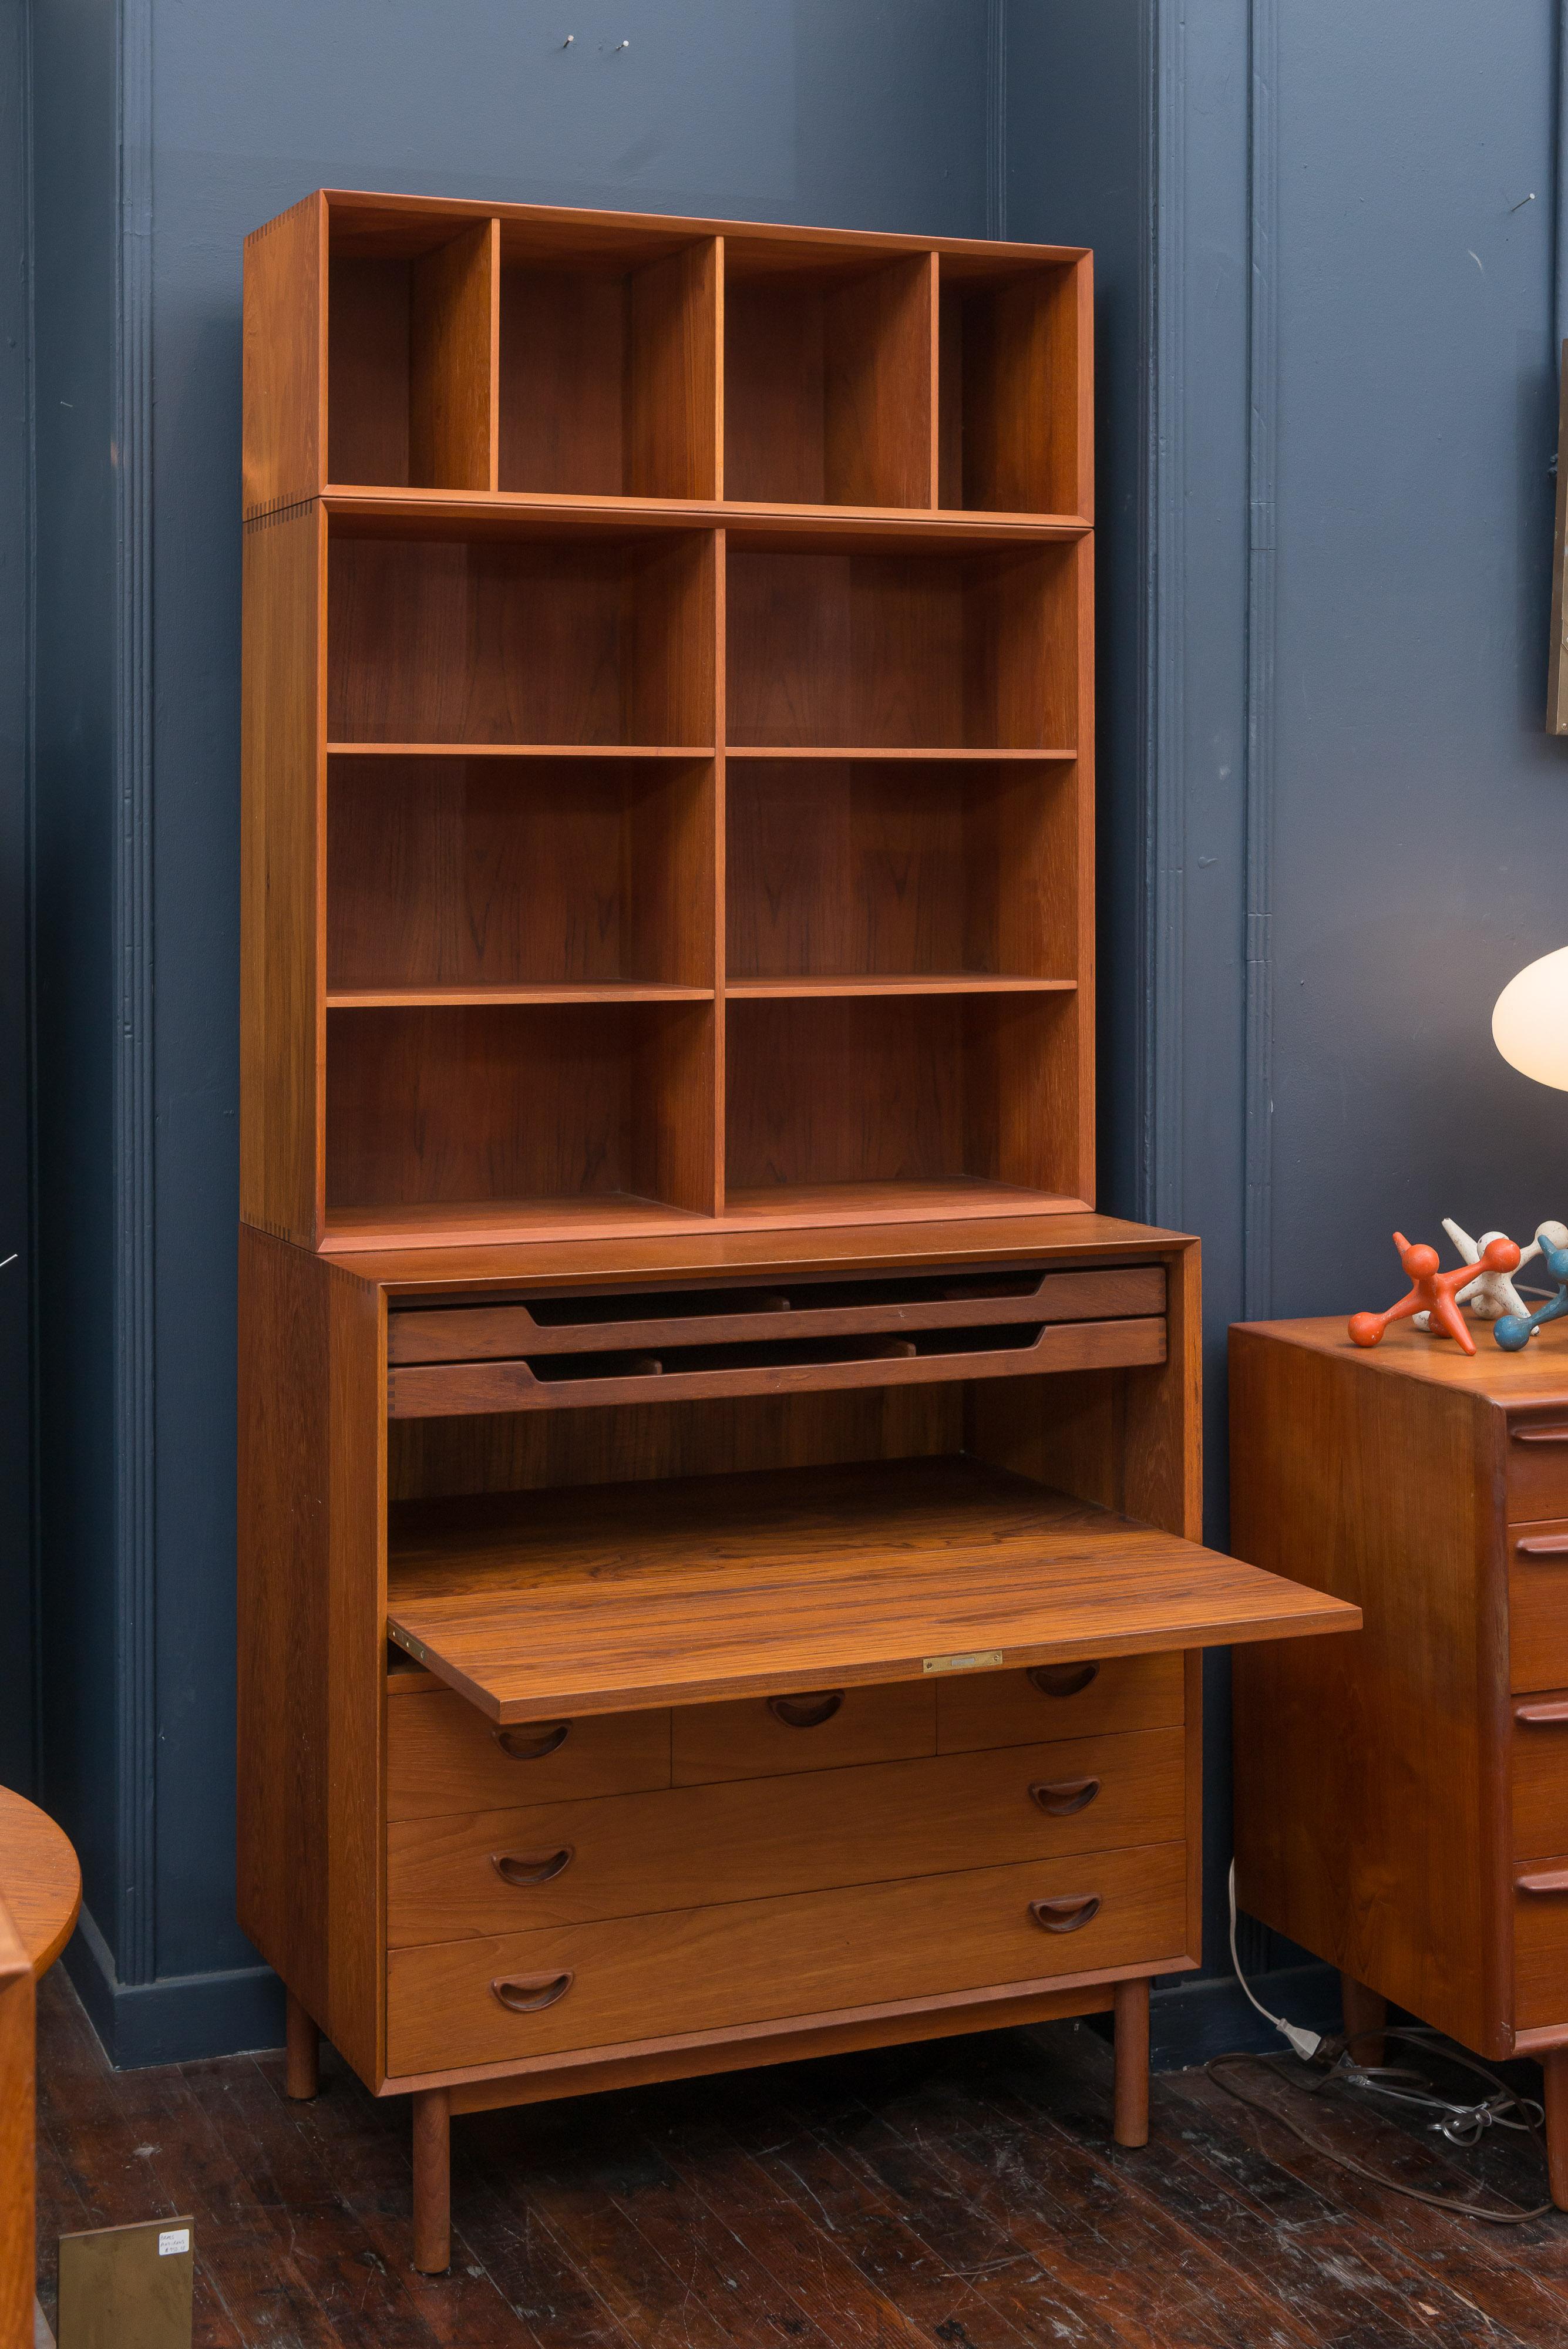 Tall Danish teak secretary bookcase designed by Peter Hvidt & Orla Mølgaard, Denmark. The locking secretary section has two pull out paper trays and five drawers. The upper bookcase has adjustable shelves and is finished off with a file or book